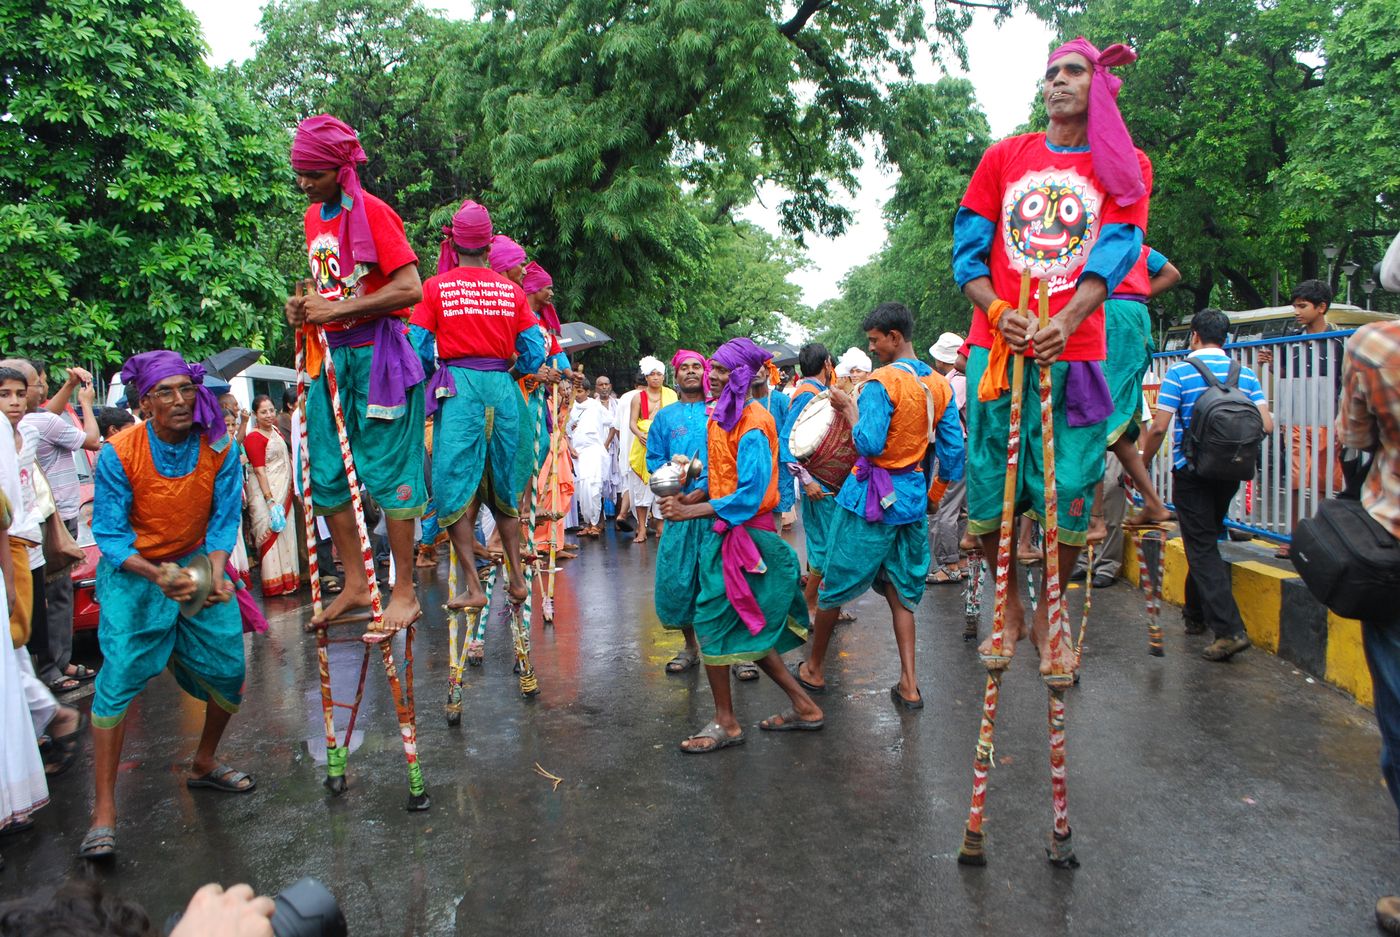 People watch colorful procession of performers during the week-long Rathyatra Festival in Kolkata